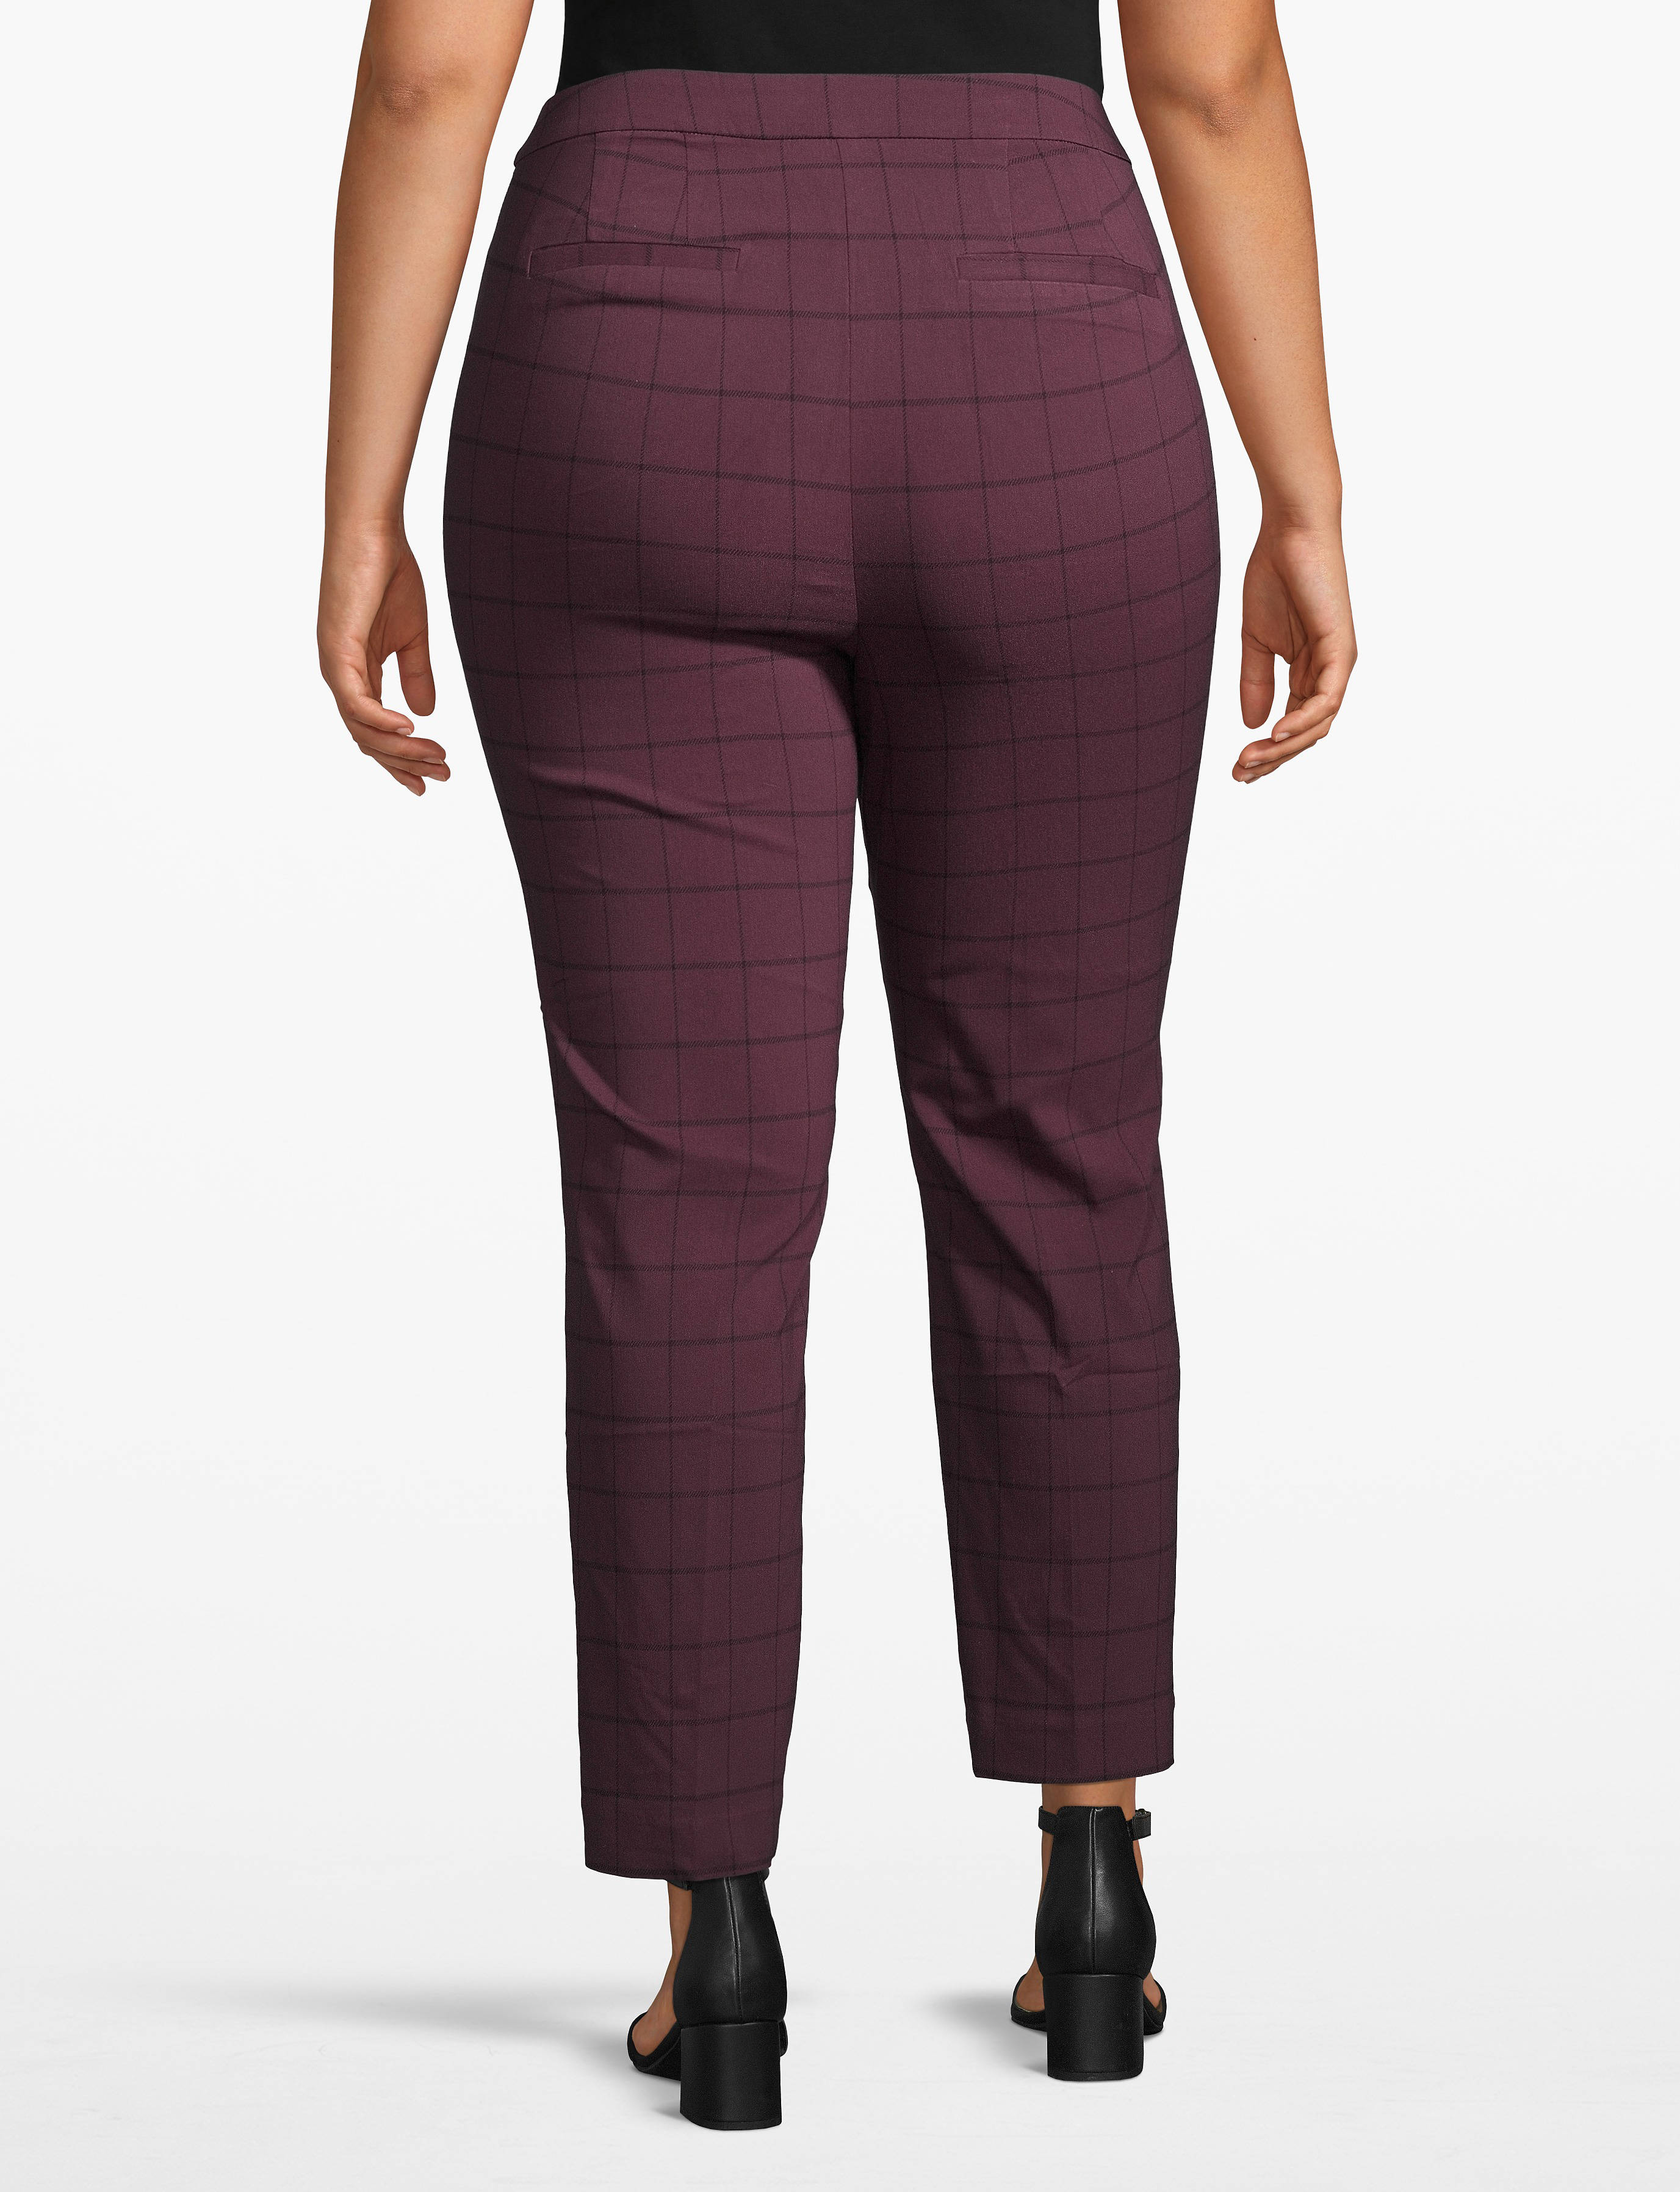 Ankle Pant (solid and printed):LBF20077_Windowpane_colorway3:14 Product Image 2